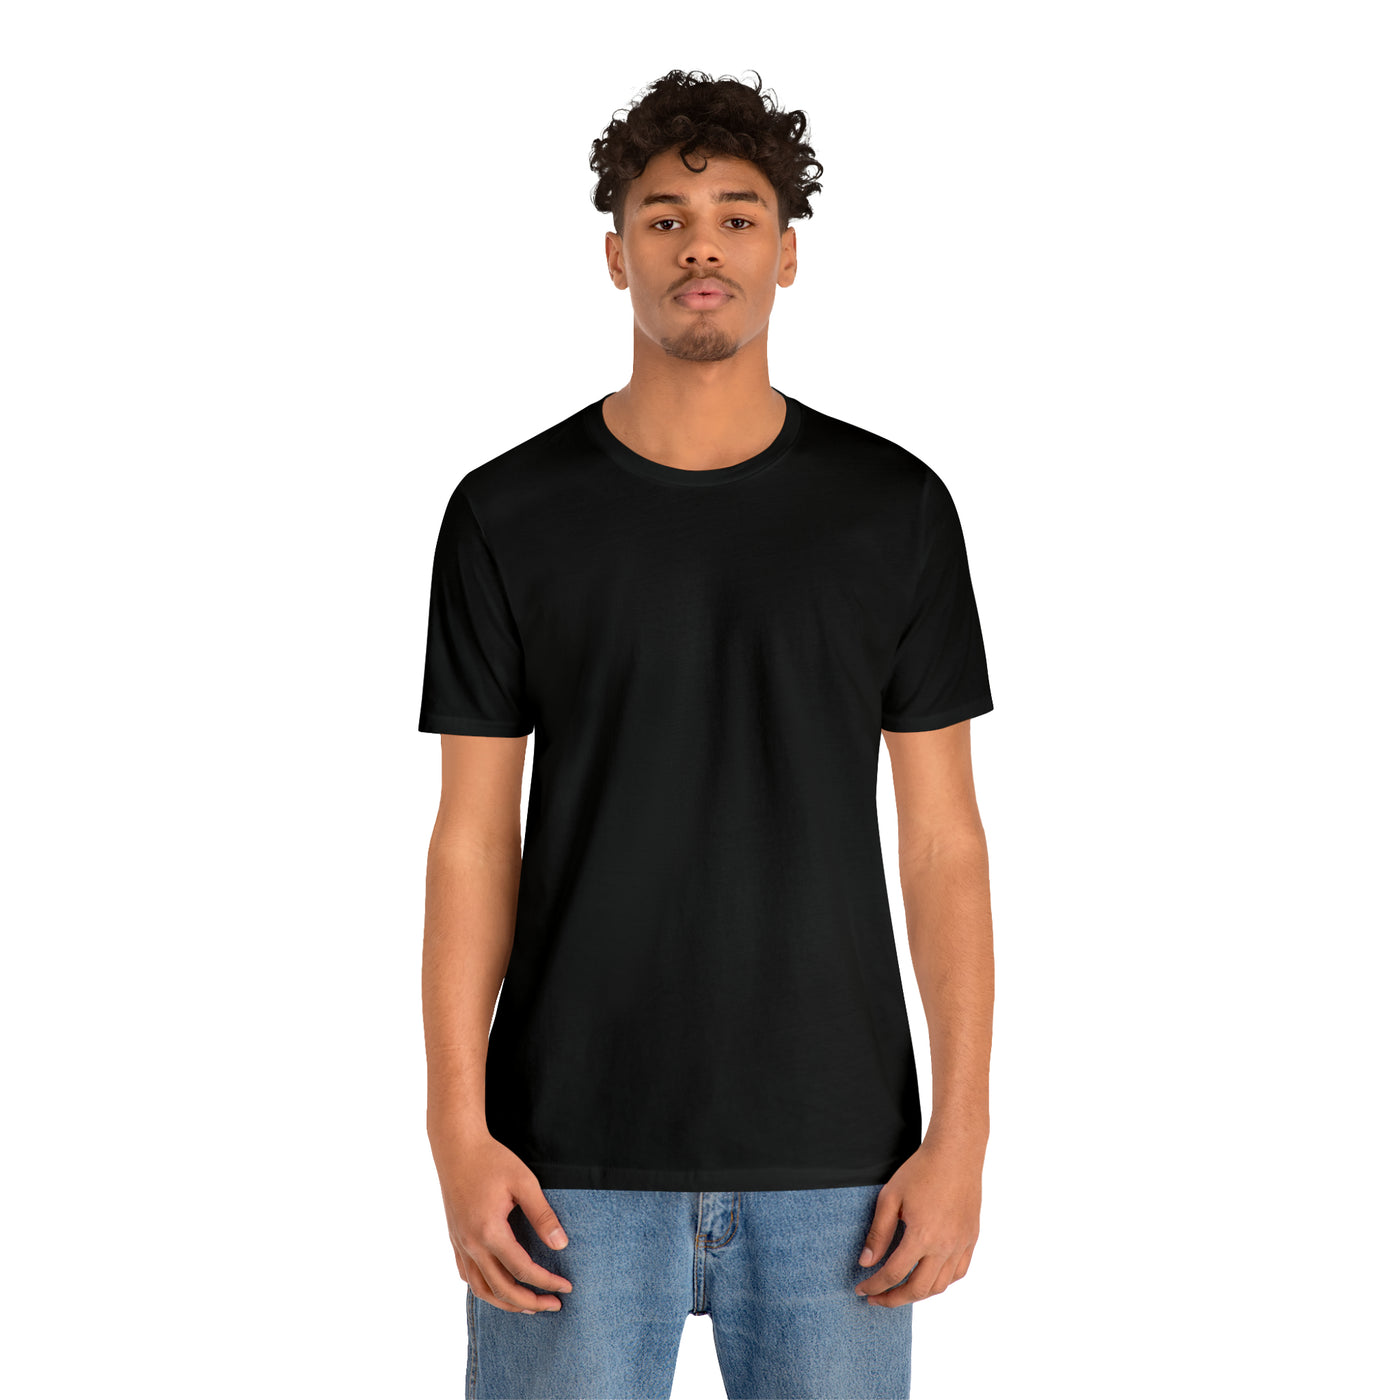 Relax Room T-Shirt